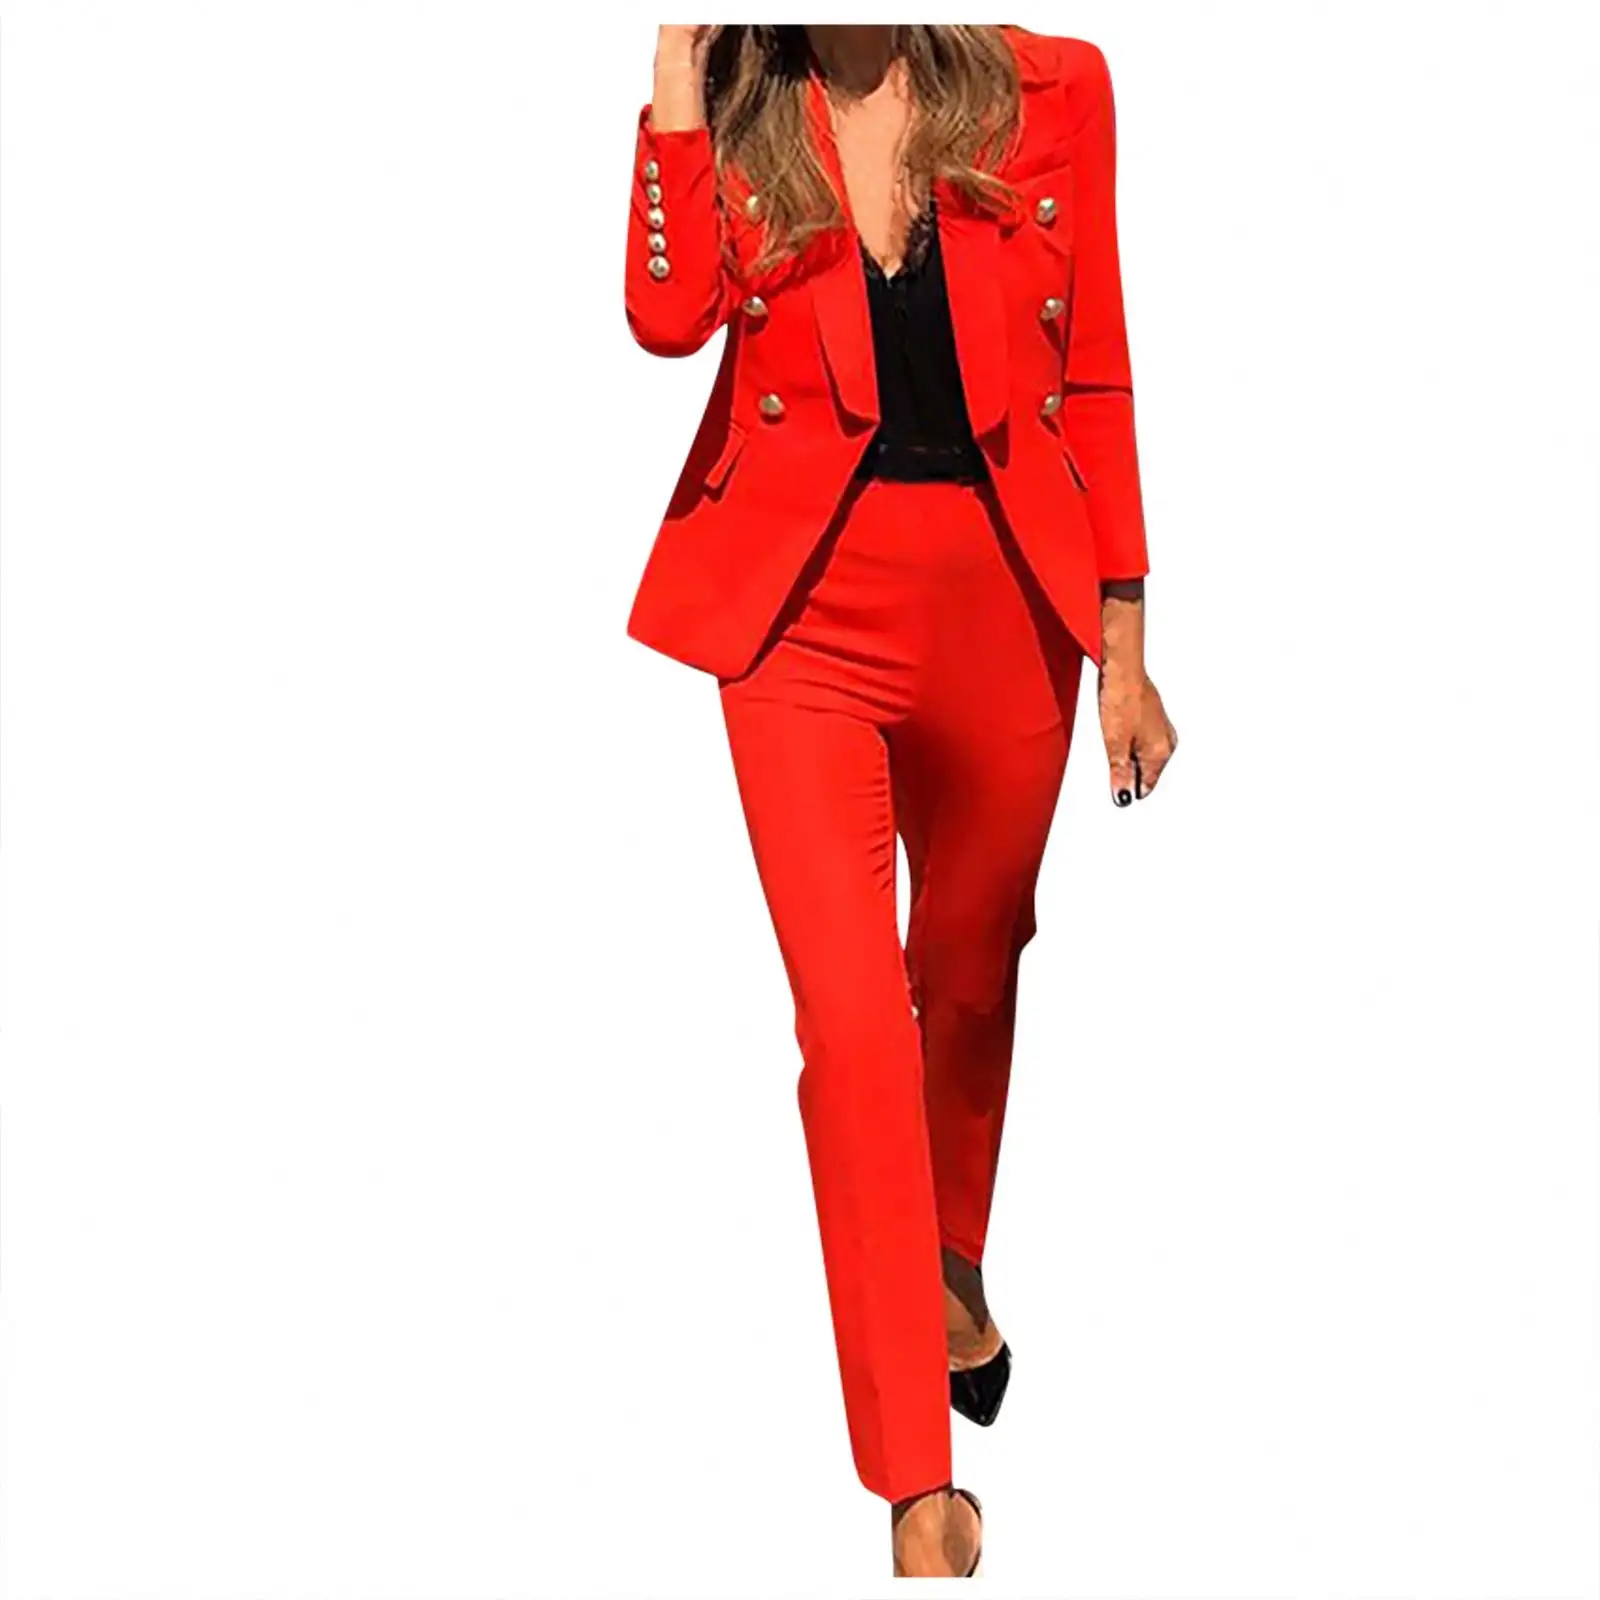 Fashion new women's formal solid two piece casual elegant blazer suit business professional office suit8230062